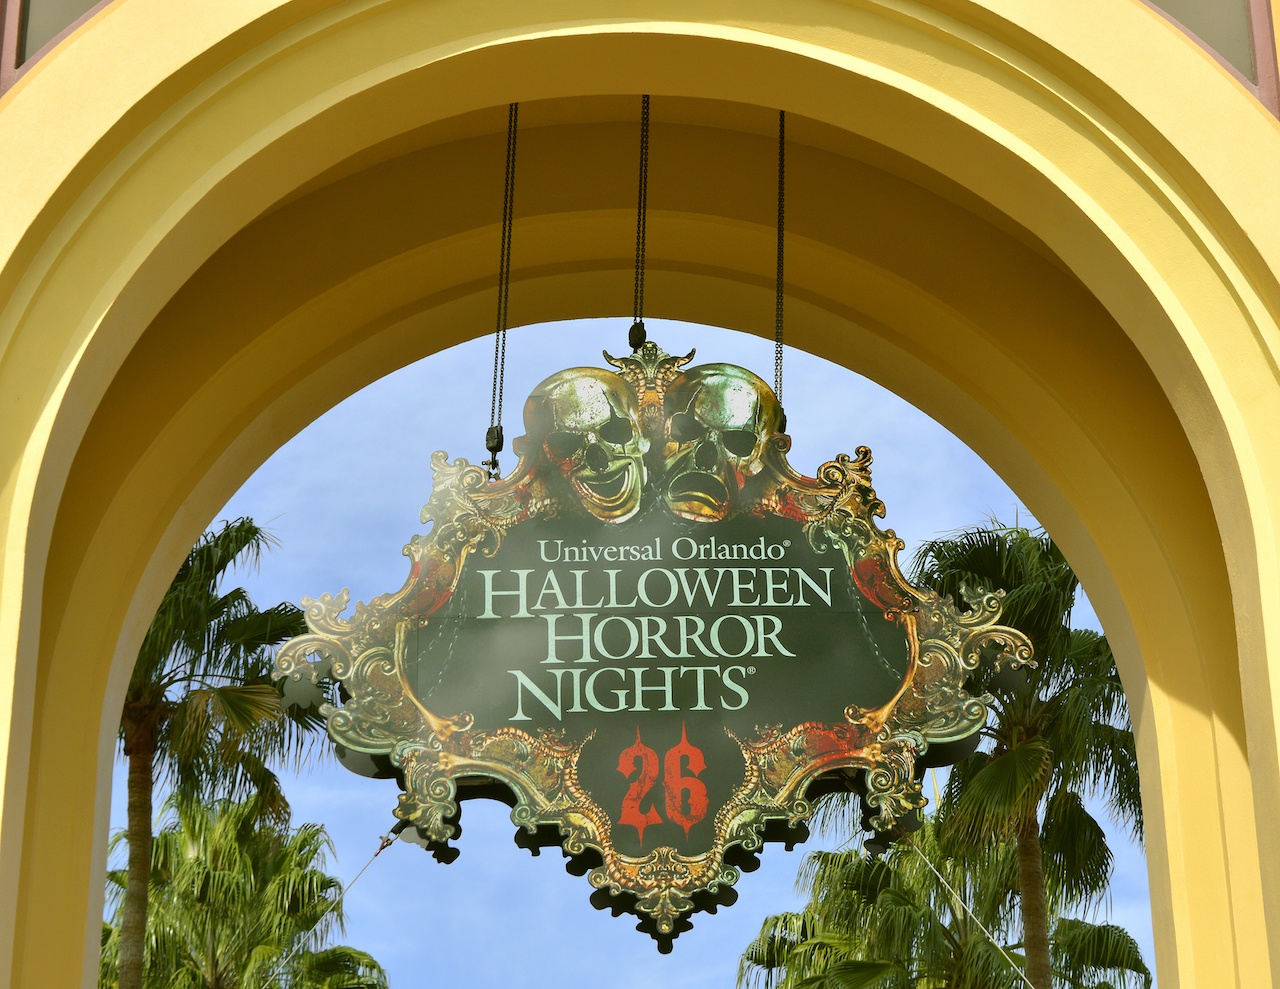 A picture of a sign in a yellow awning with skulls above that says "Universal Orlando Halloween Horror Nights 26"